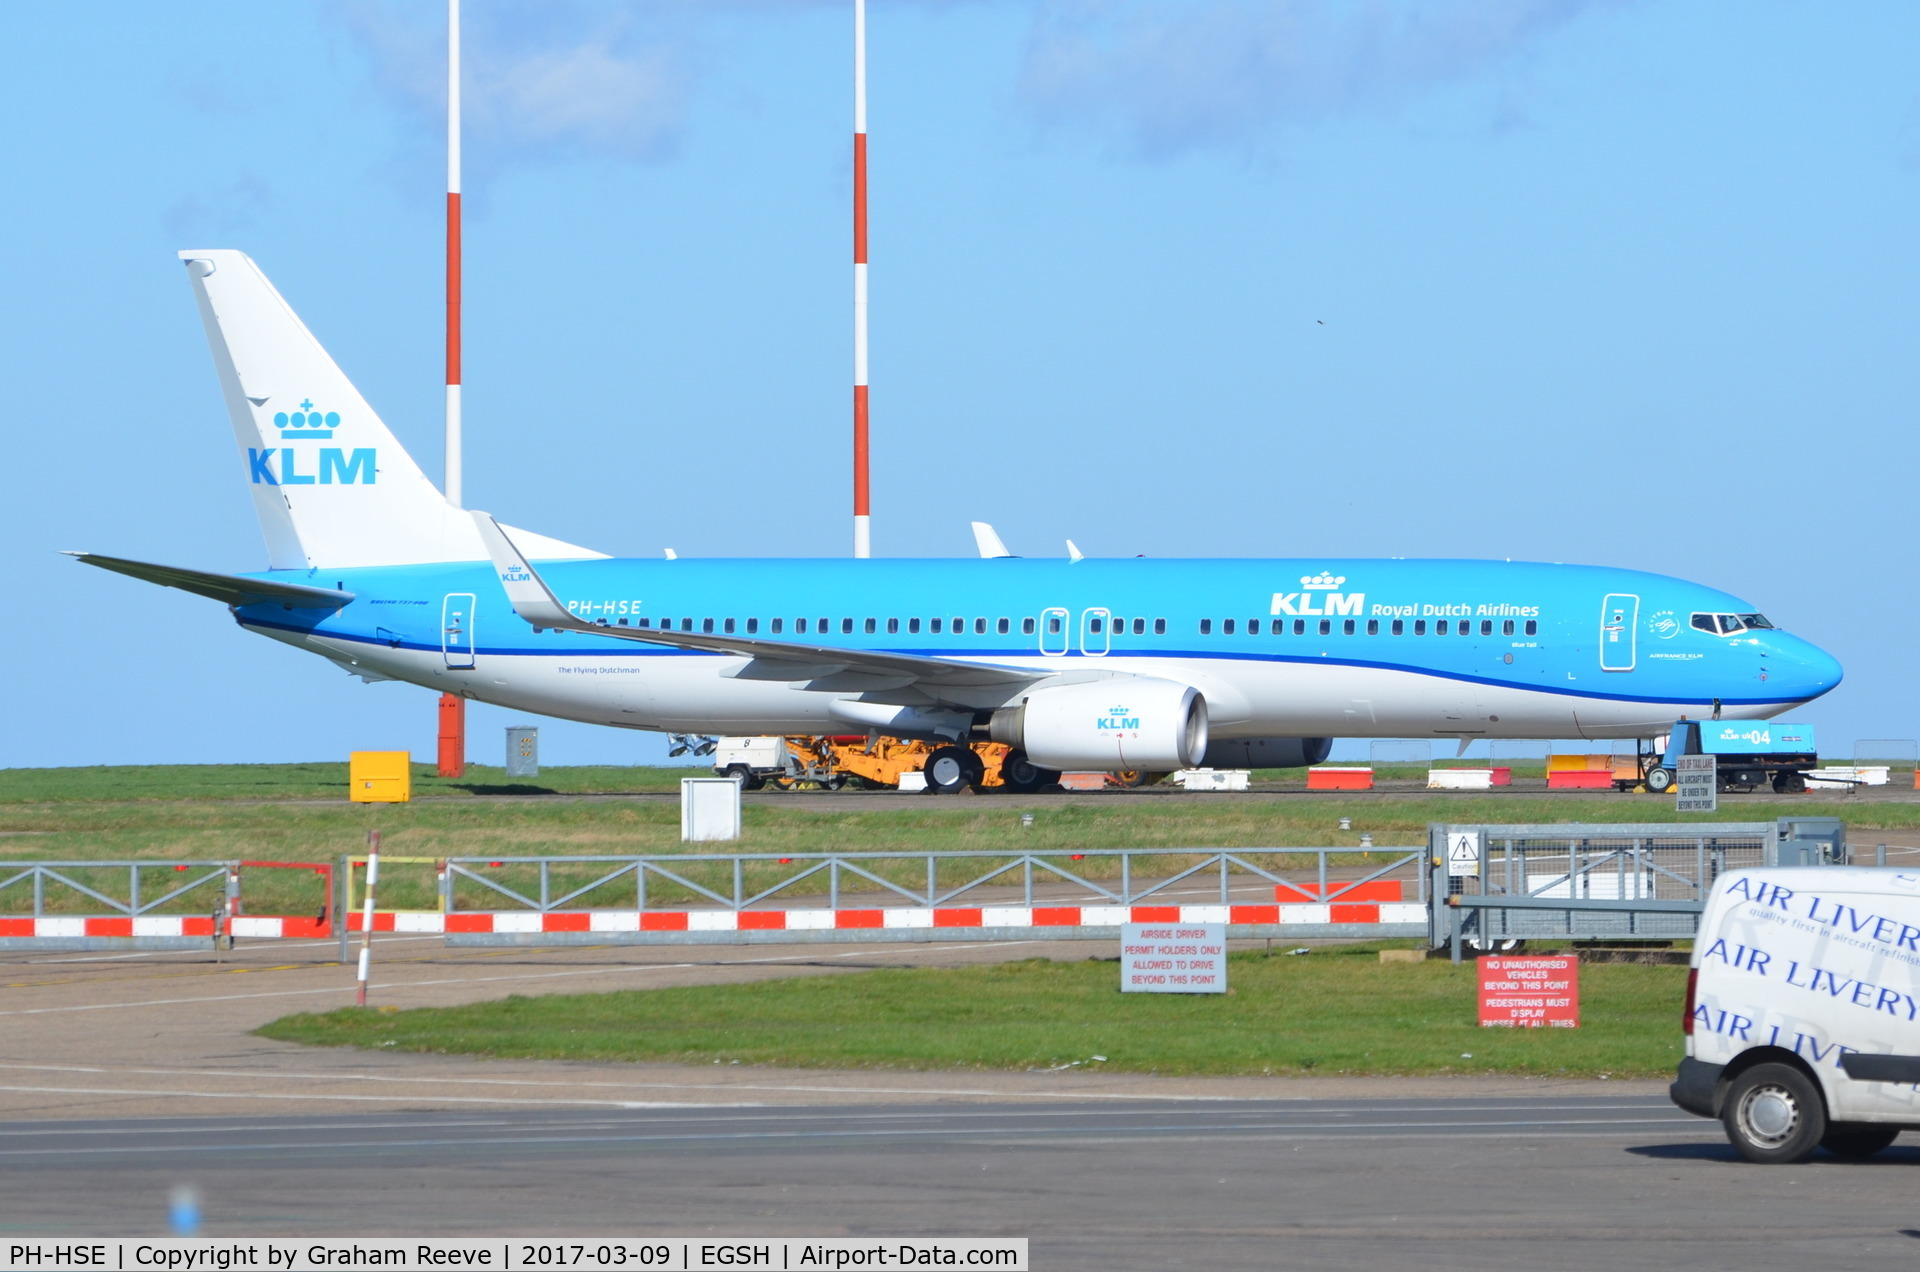 PH-HSE, 2011 Boeing 737-8K2 C/N 39259, Parked at Norwich after a re-spray into KLM colours.